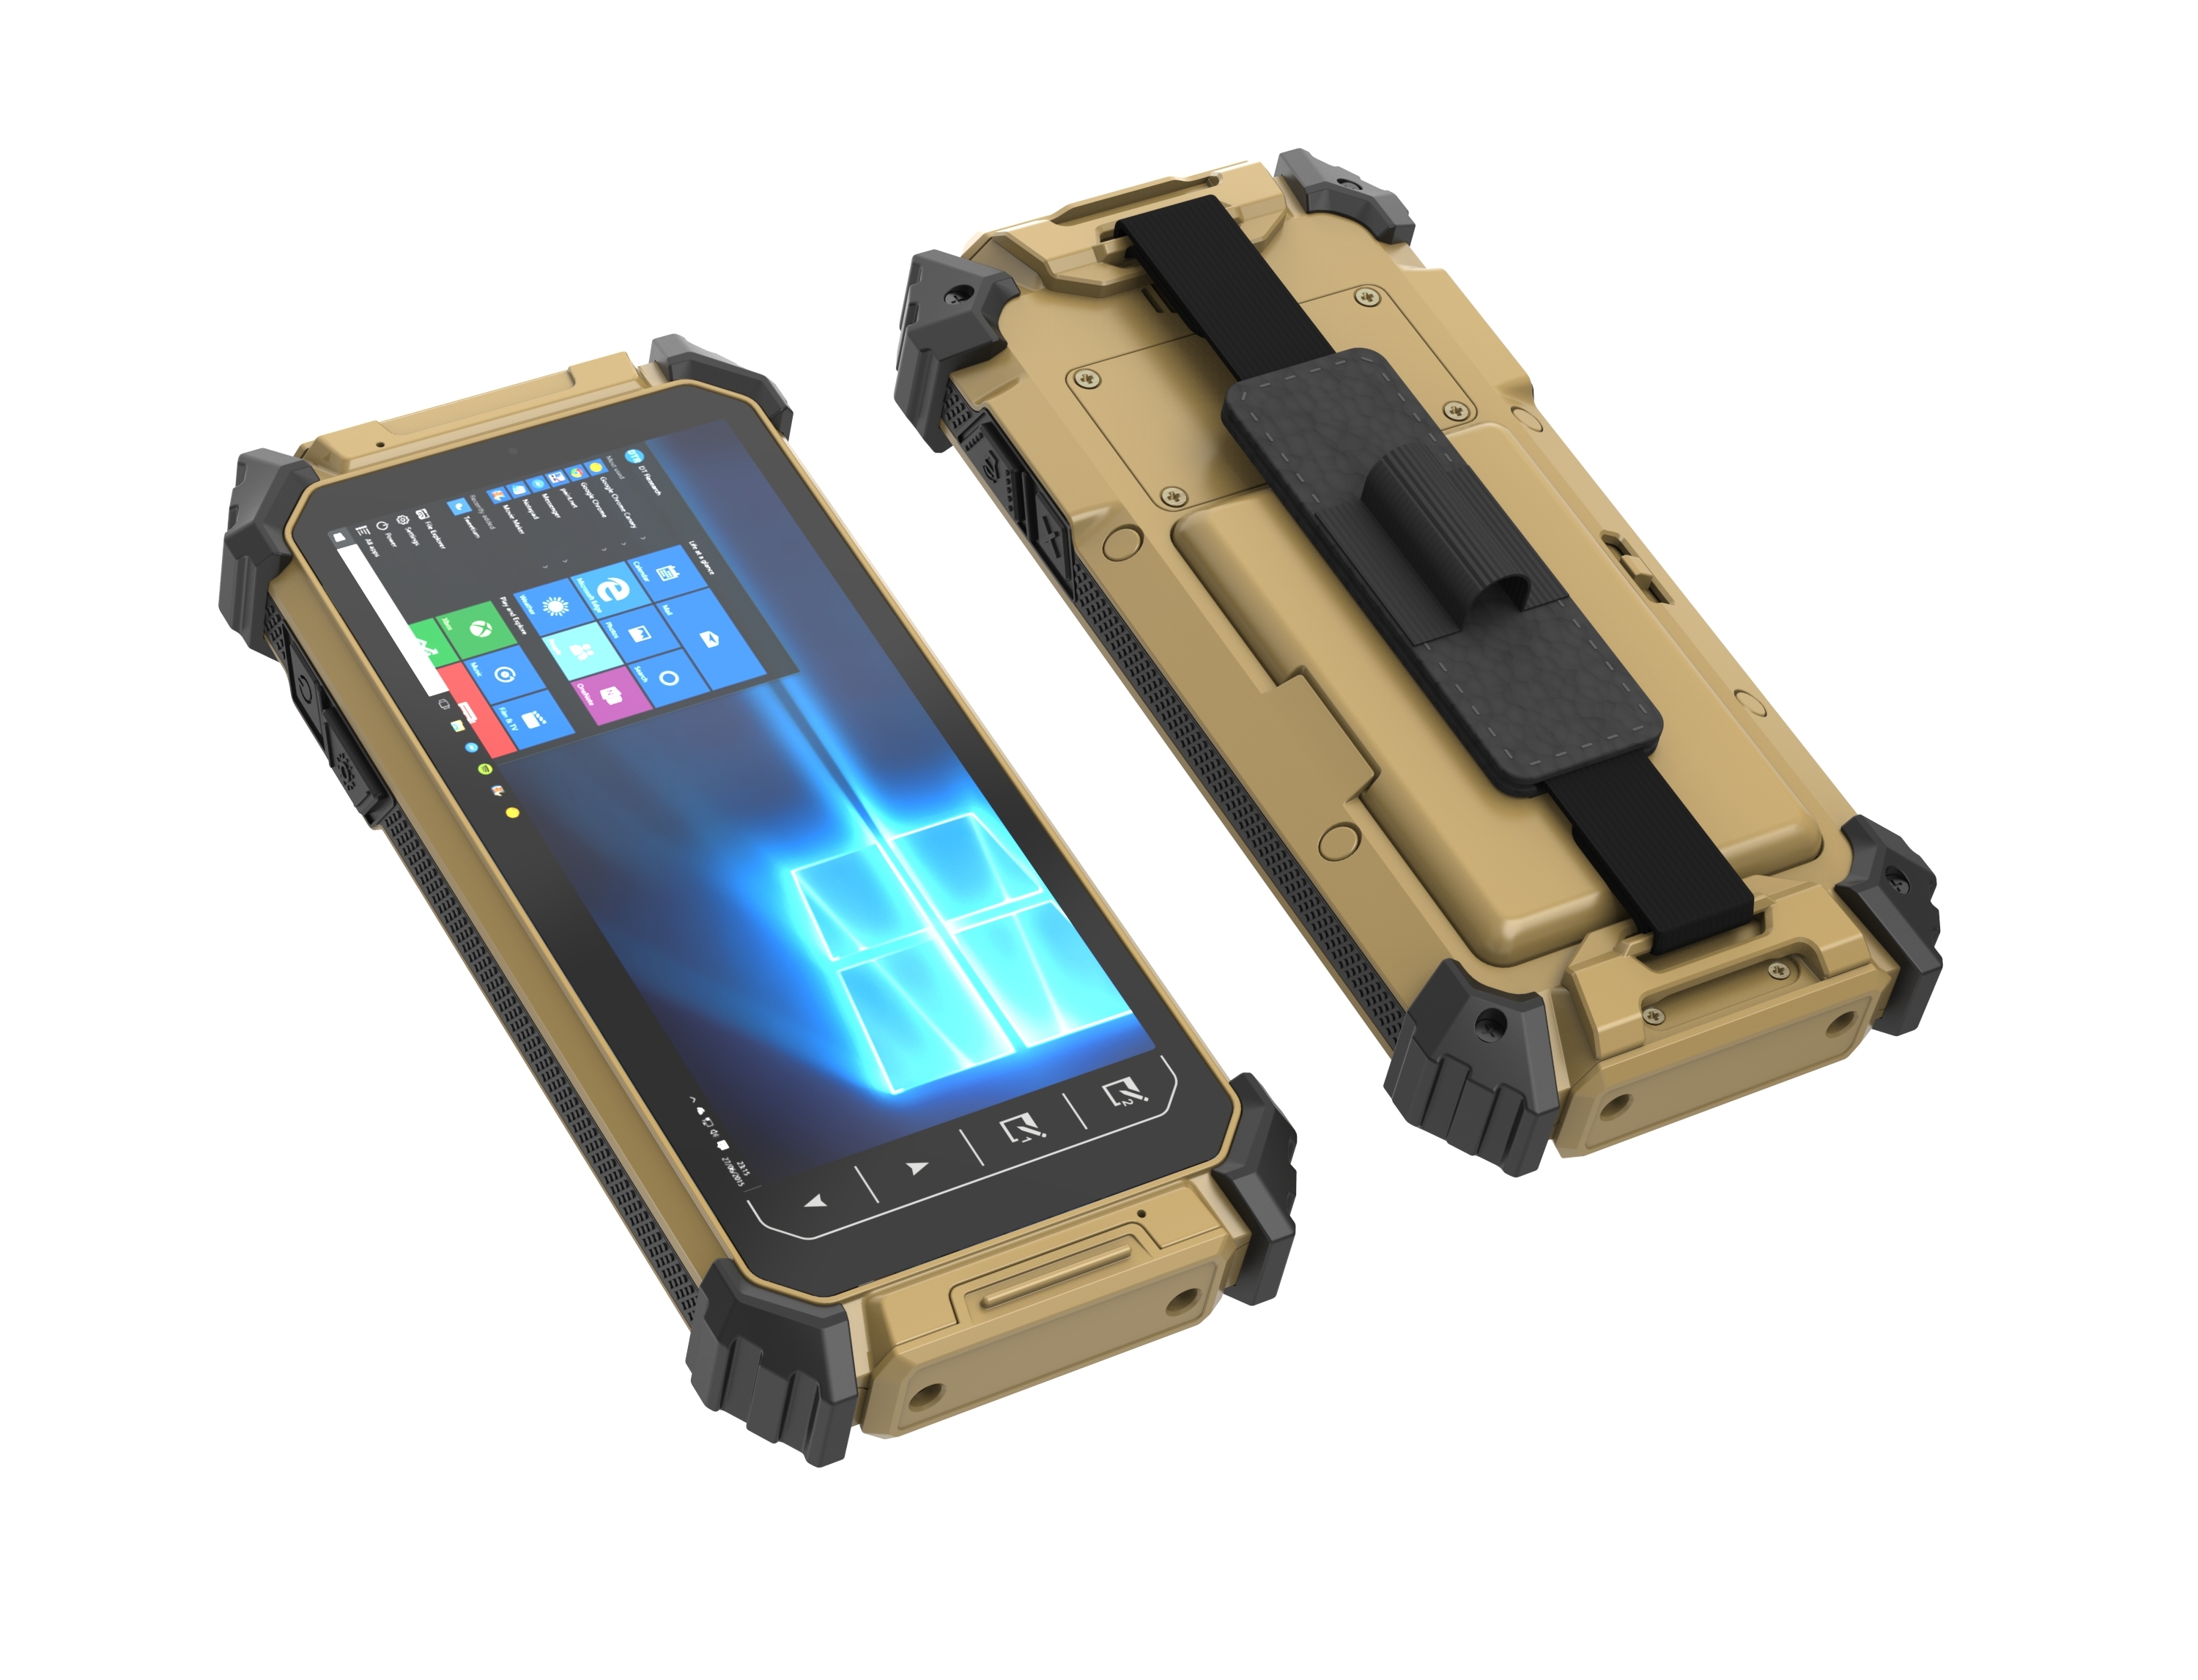 DT Research Announces Unique 6-inch Windows® 10 Ultra Rugged Tablet with  Walkie-Talkie Communication